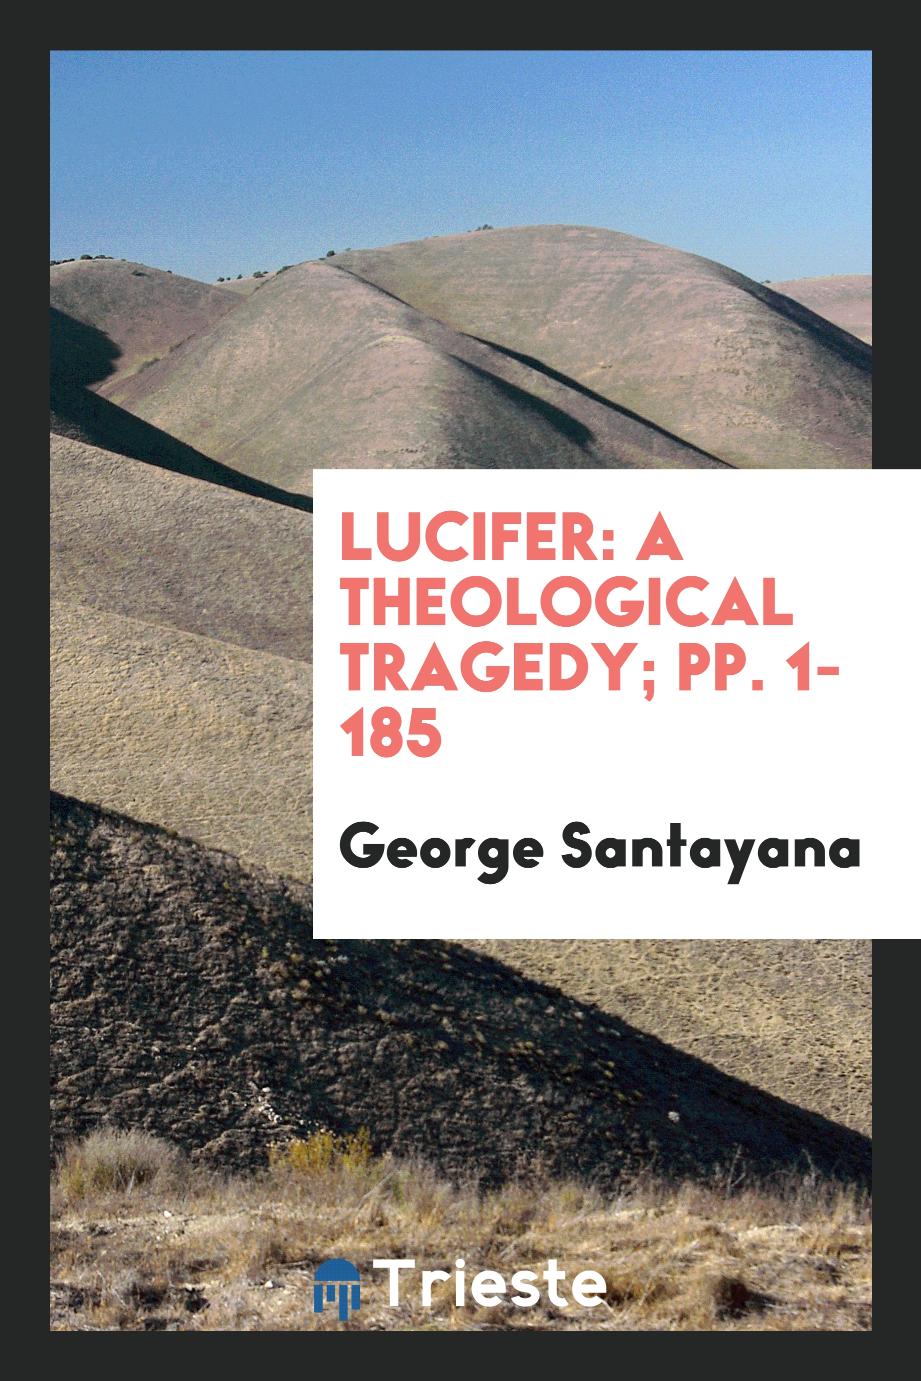 Lucifer: A Theological Tragedy; pp. 1-185